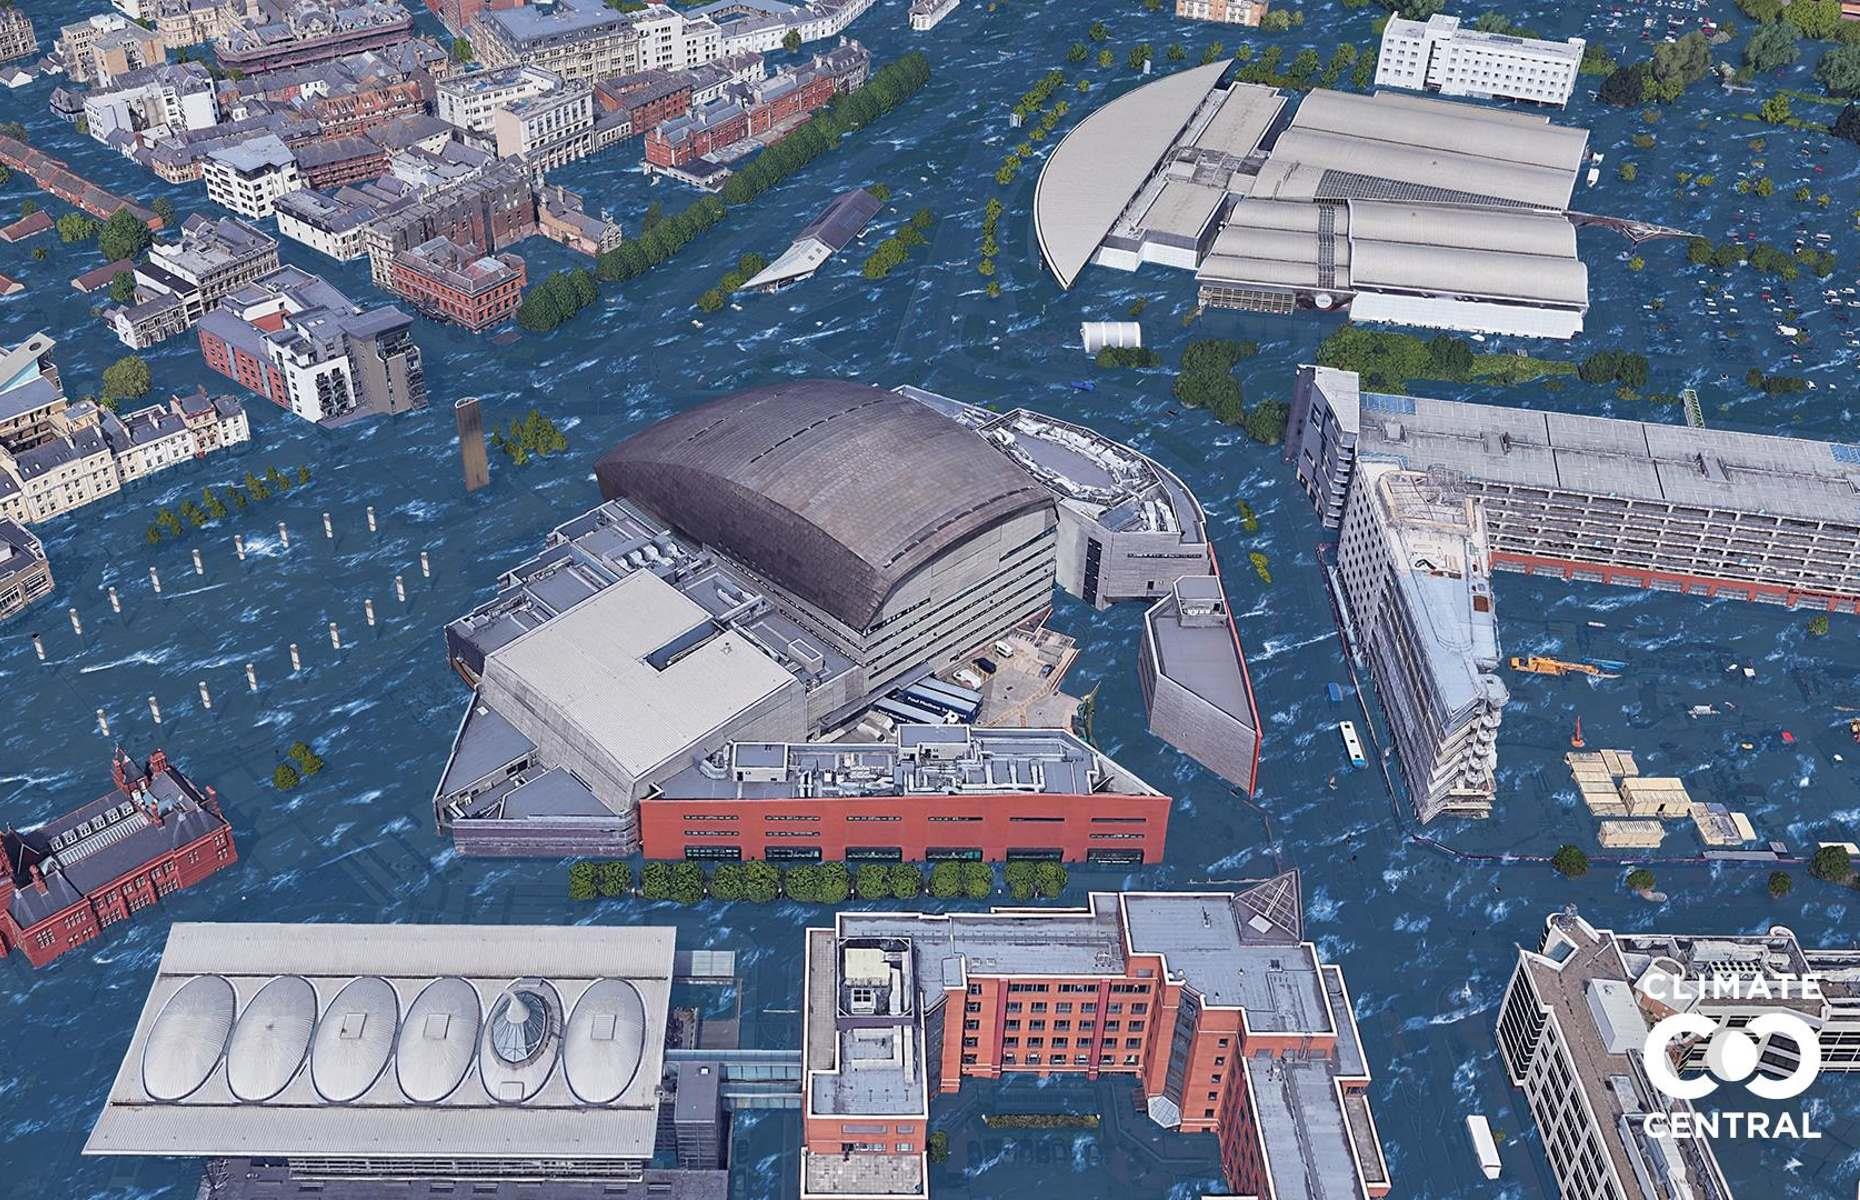 Huge areas of Cardiff, which faces onto the Bristol Channel, would be underwater in the event of unchecked global warming – as you can see from this shocking image of the Wales Millennium Centre. In fact, if you look closely in the left-hand corner, only the rooftops of some houses are visible above the water.